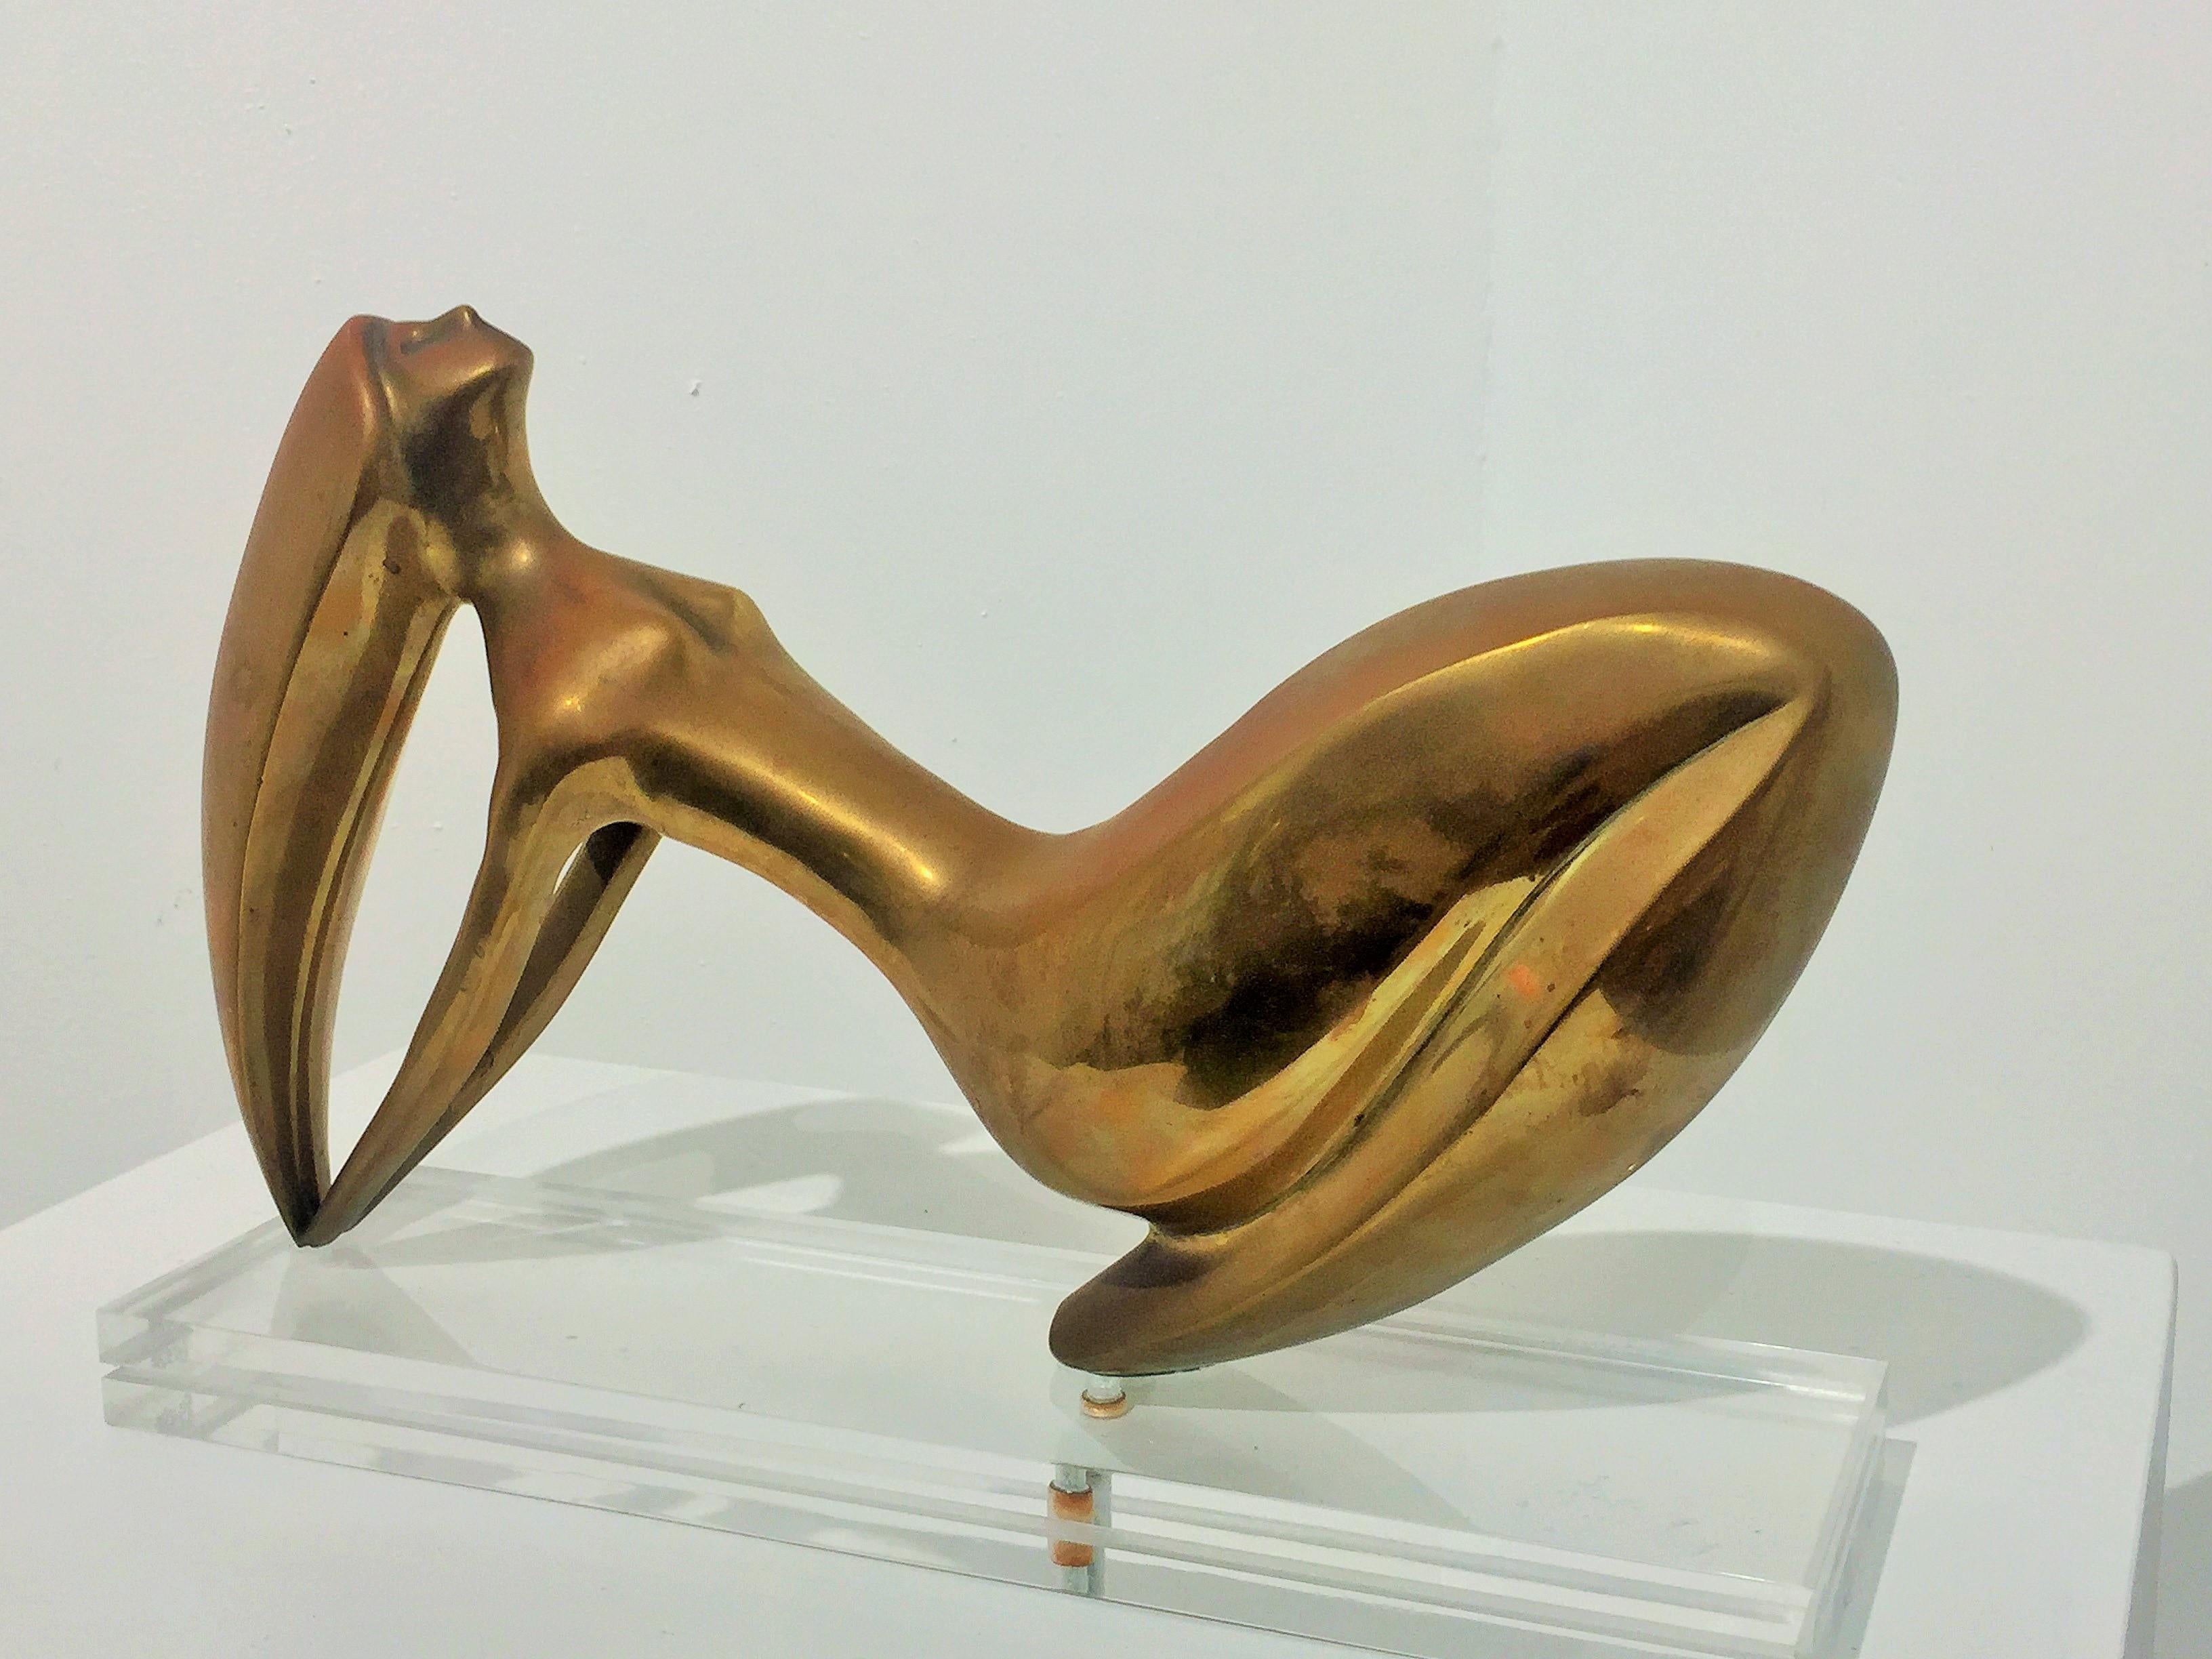 Figurative reclining female brass sculpture, with acrylic base. She has a beautiful patina and her hair is an acrobatic marvel that takes center stage. The acrylic base allows the sculpture to be viewed as in mid-air, circa 1970s.
 